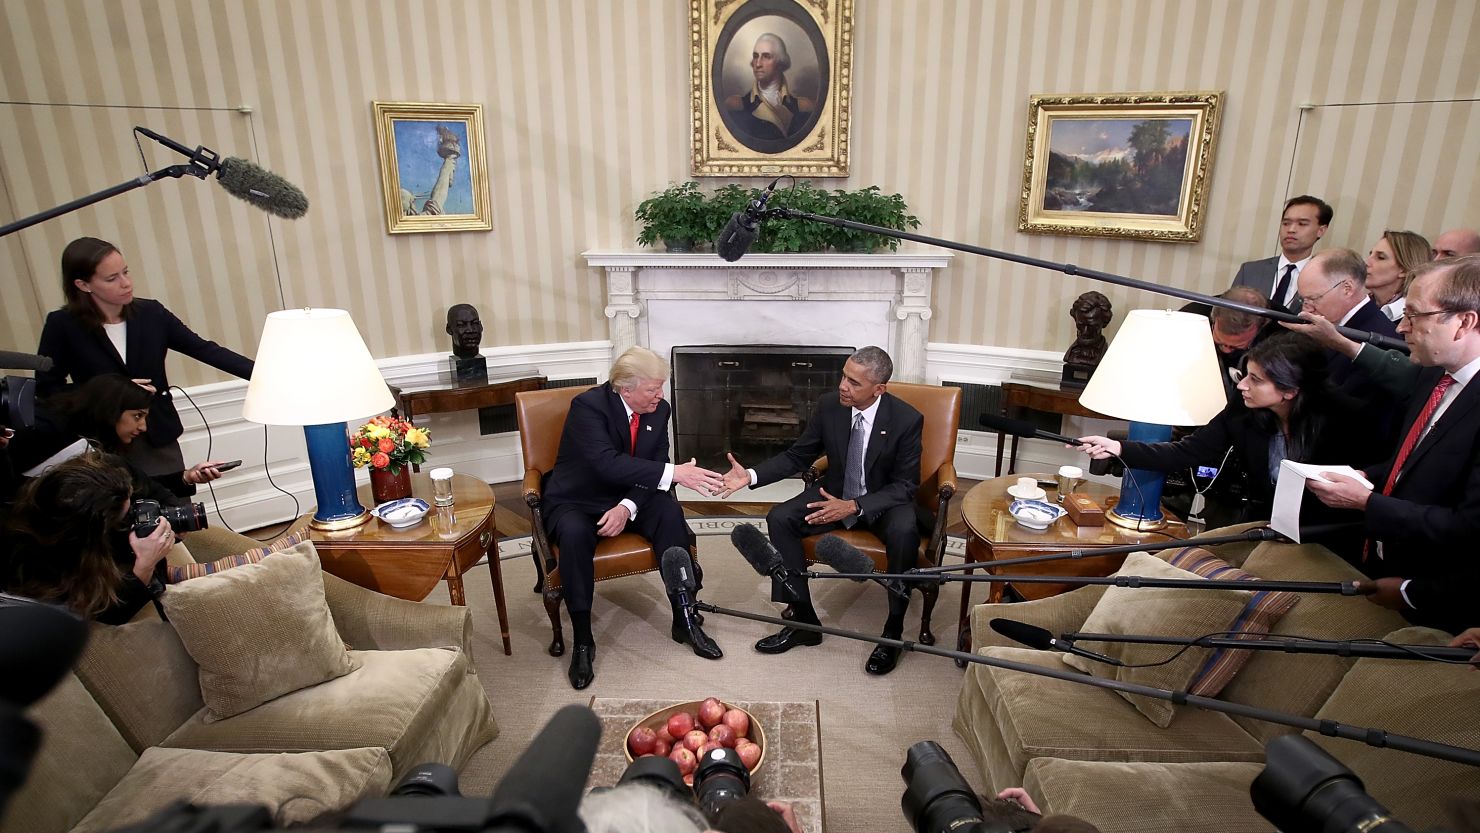 Barack Obama greets Donald Trump in the Oval Office shortly after Trump's election win in November.